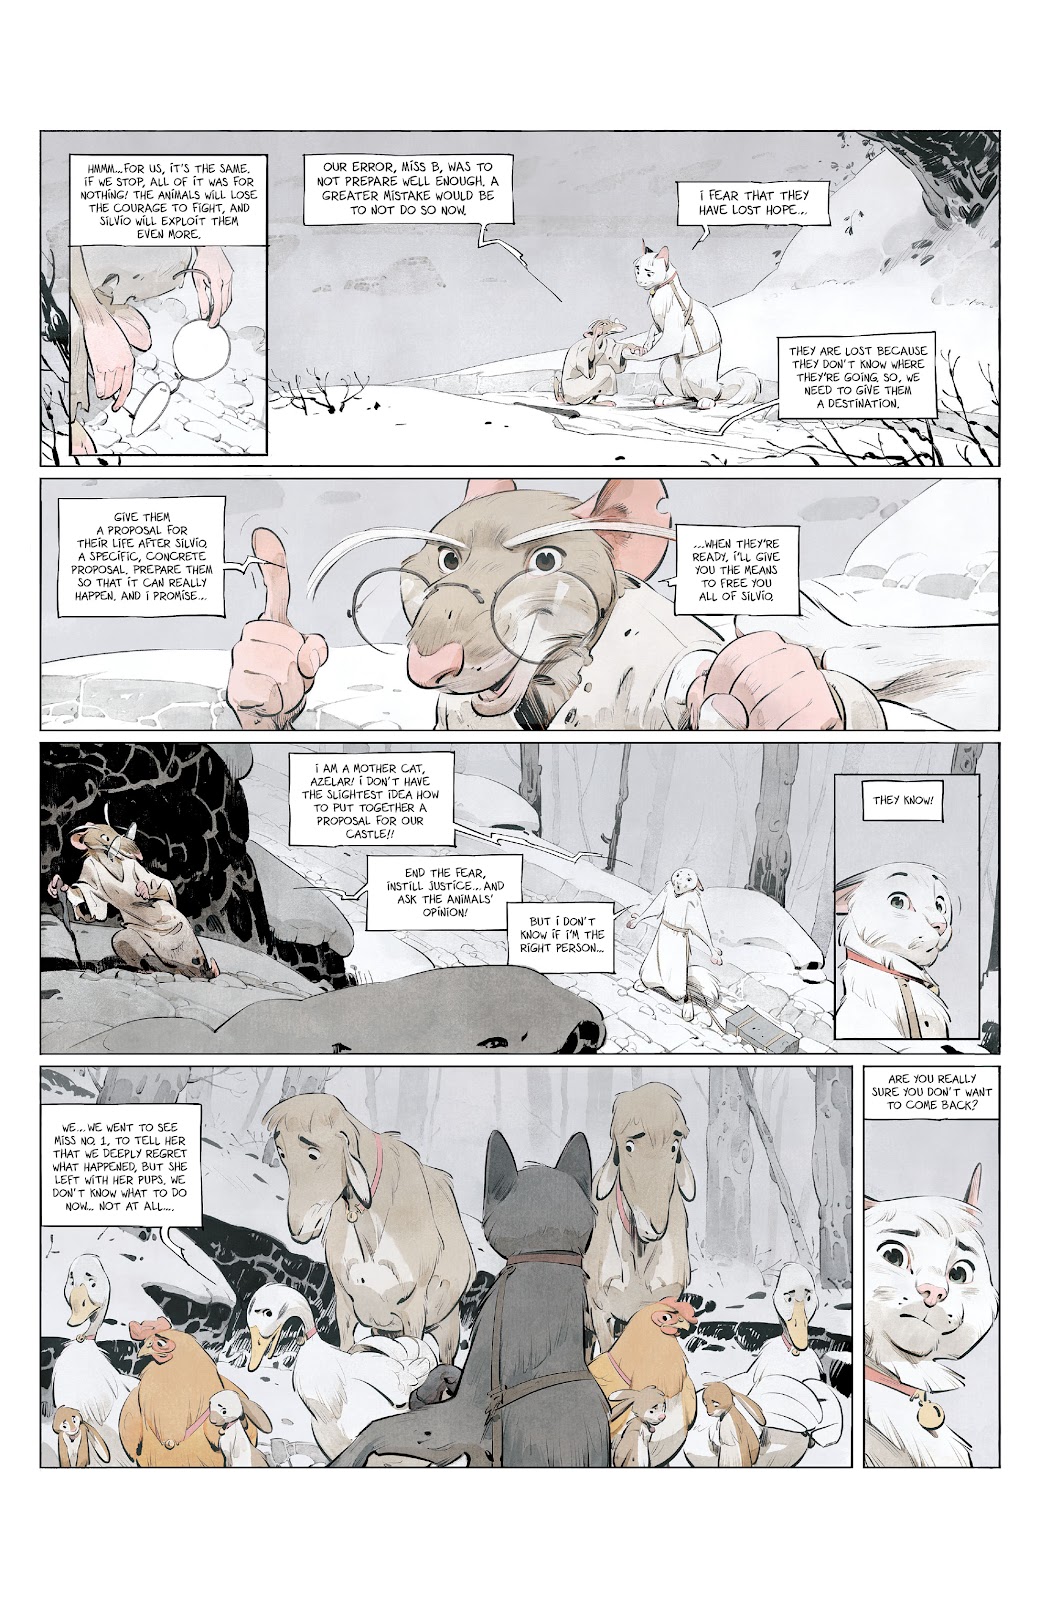 Animal Castle Vol. 2 issue 1 - Page 14